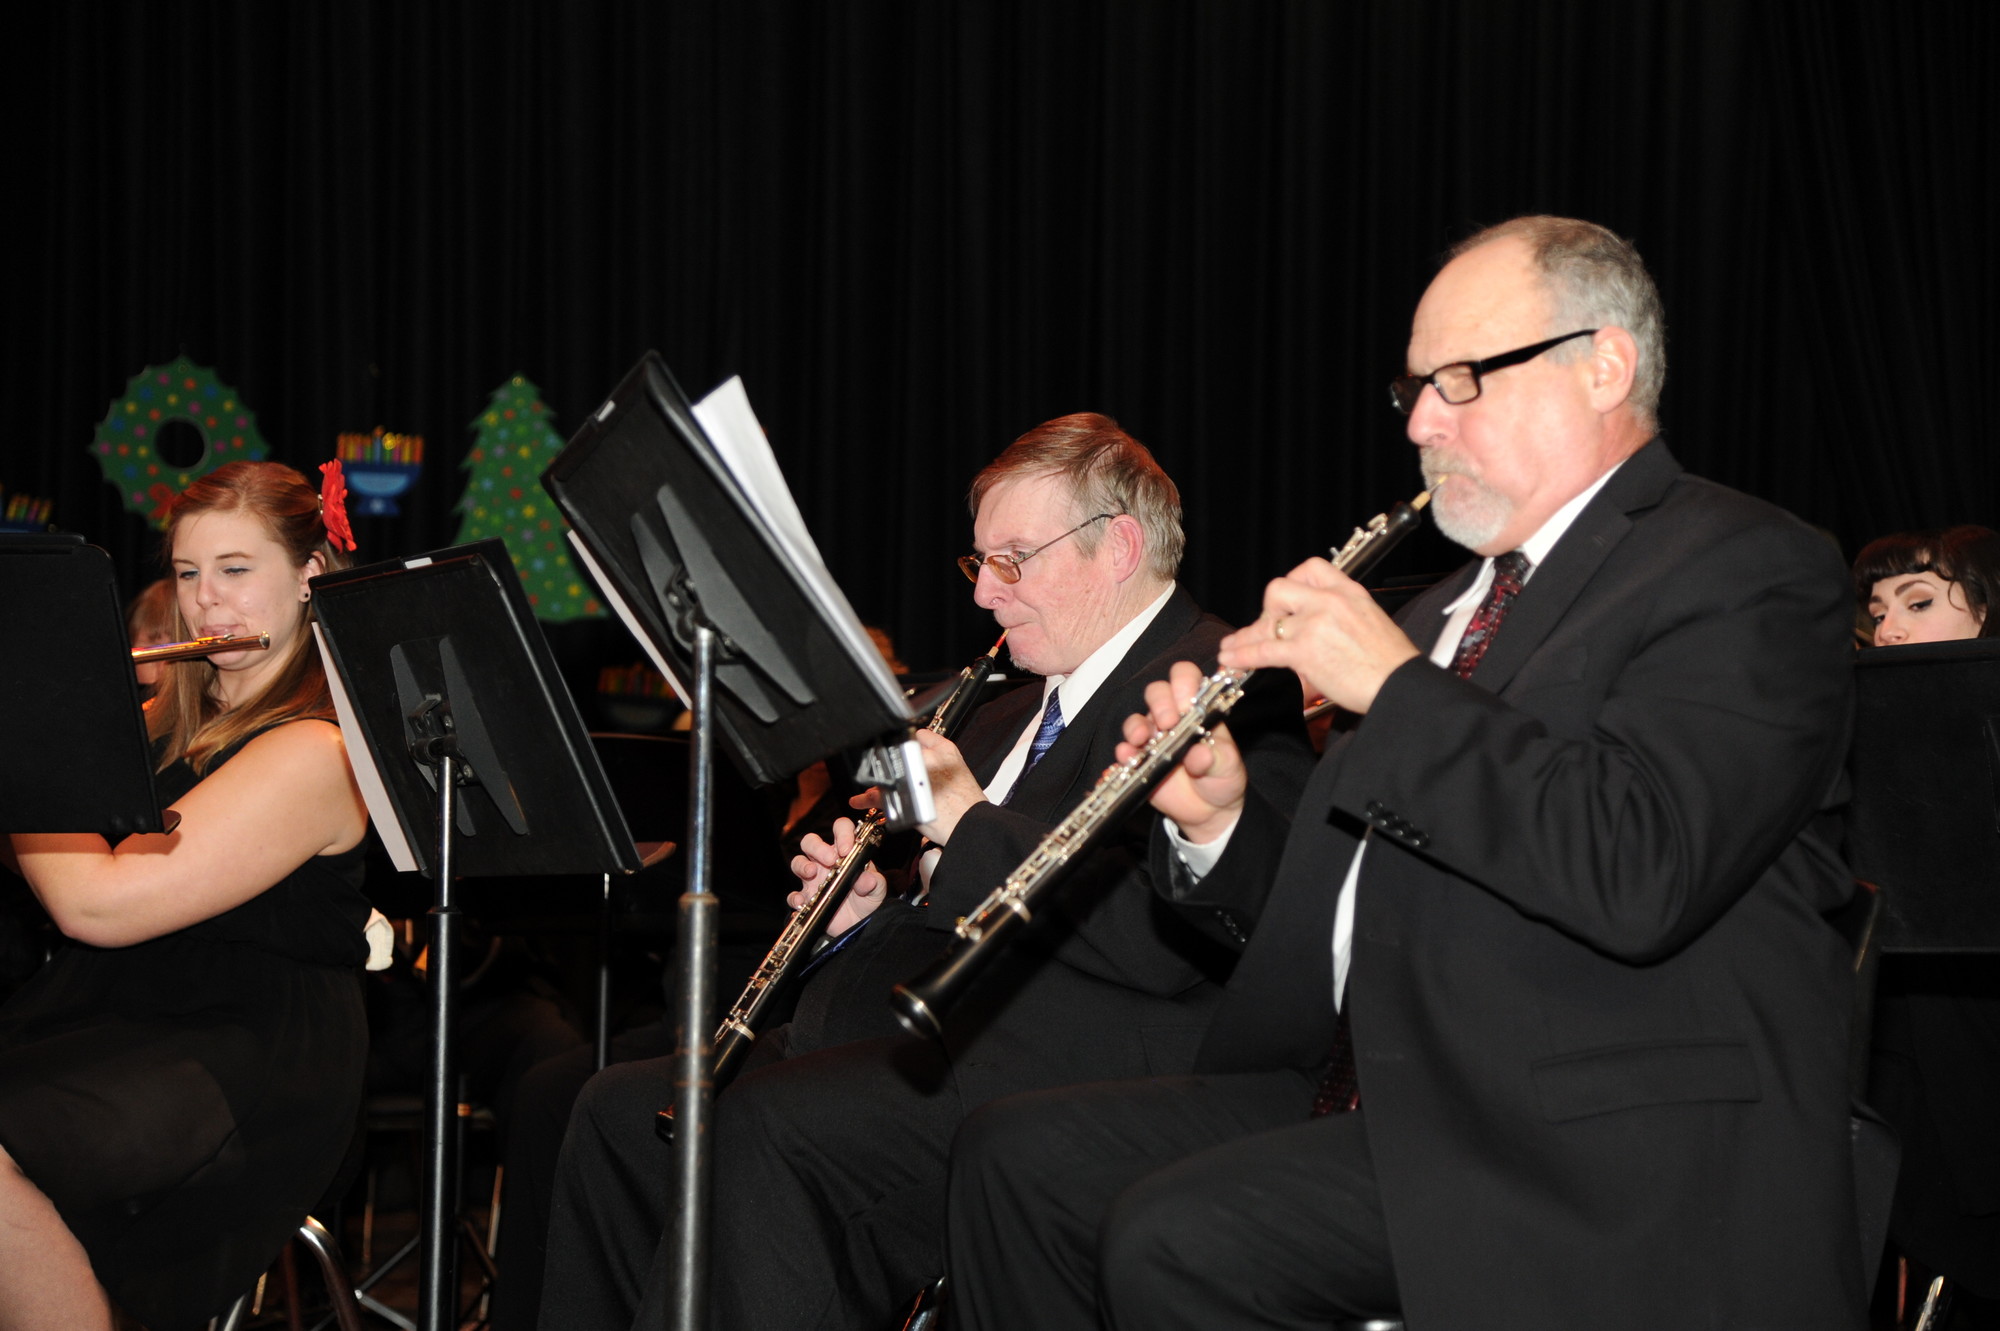 The Seaford Community Band performed an array of holiday songs last Saturday night.